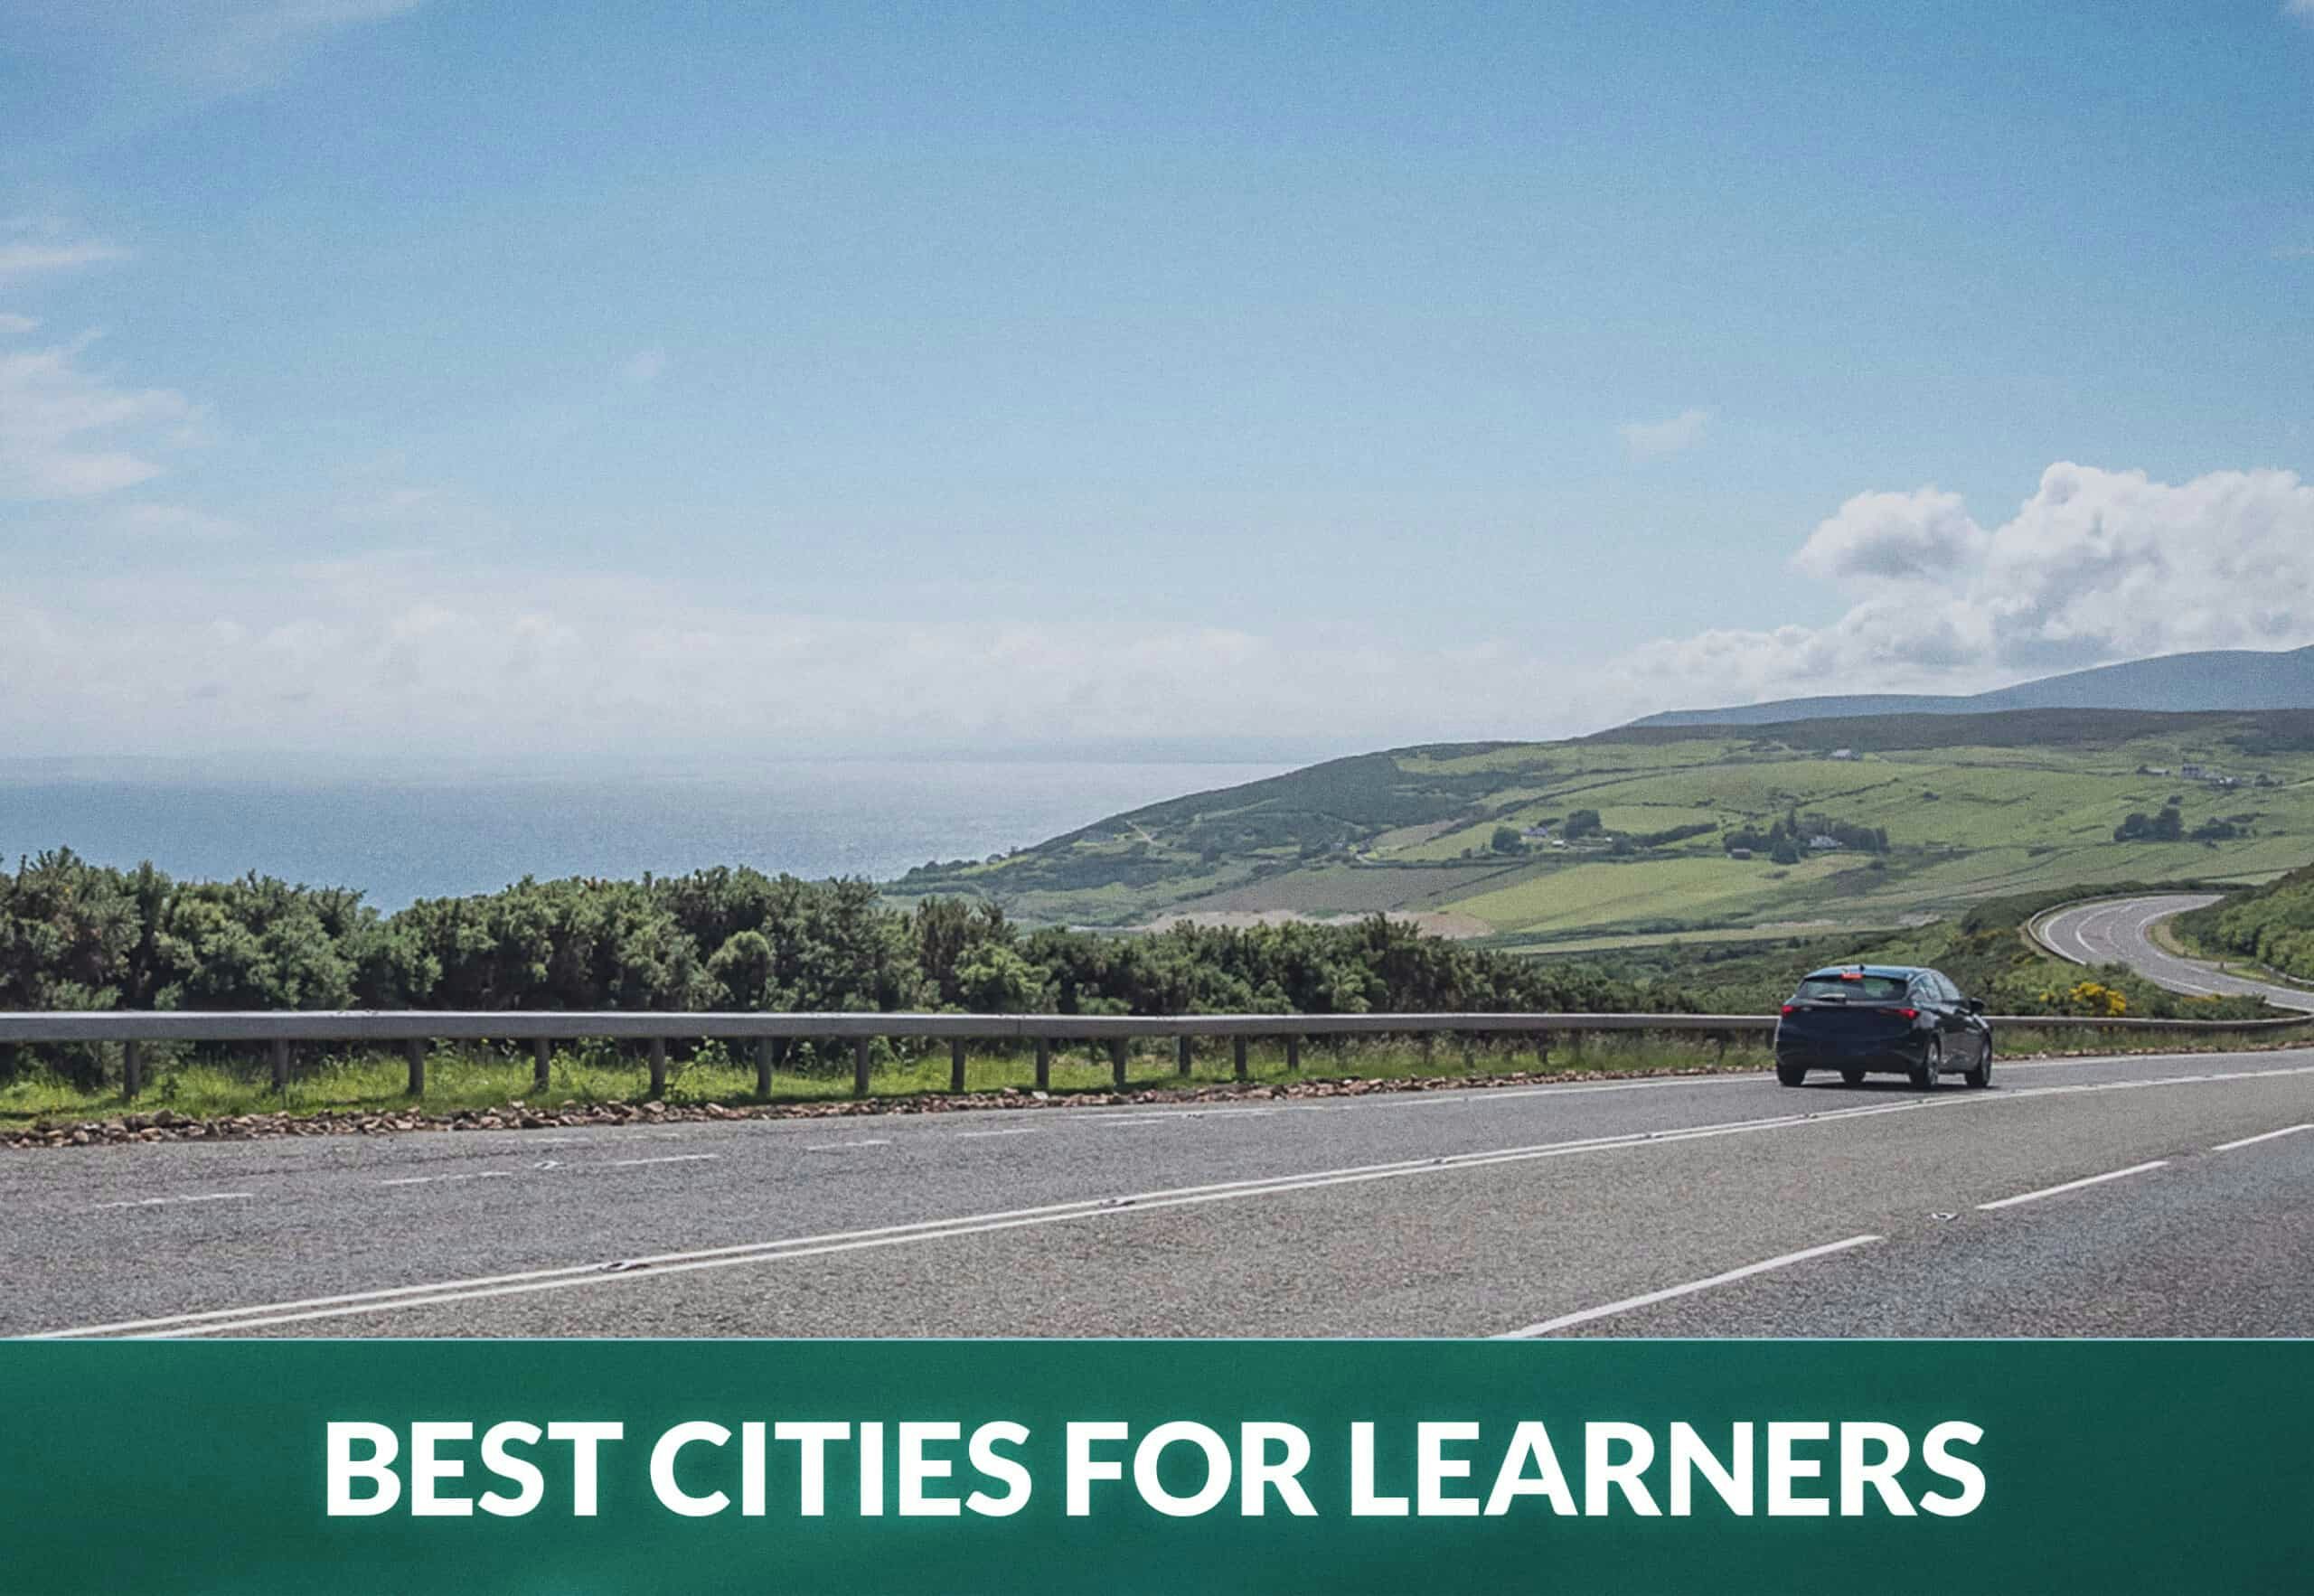 BEST CITIES FOR LEARNERS